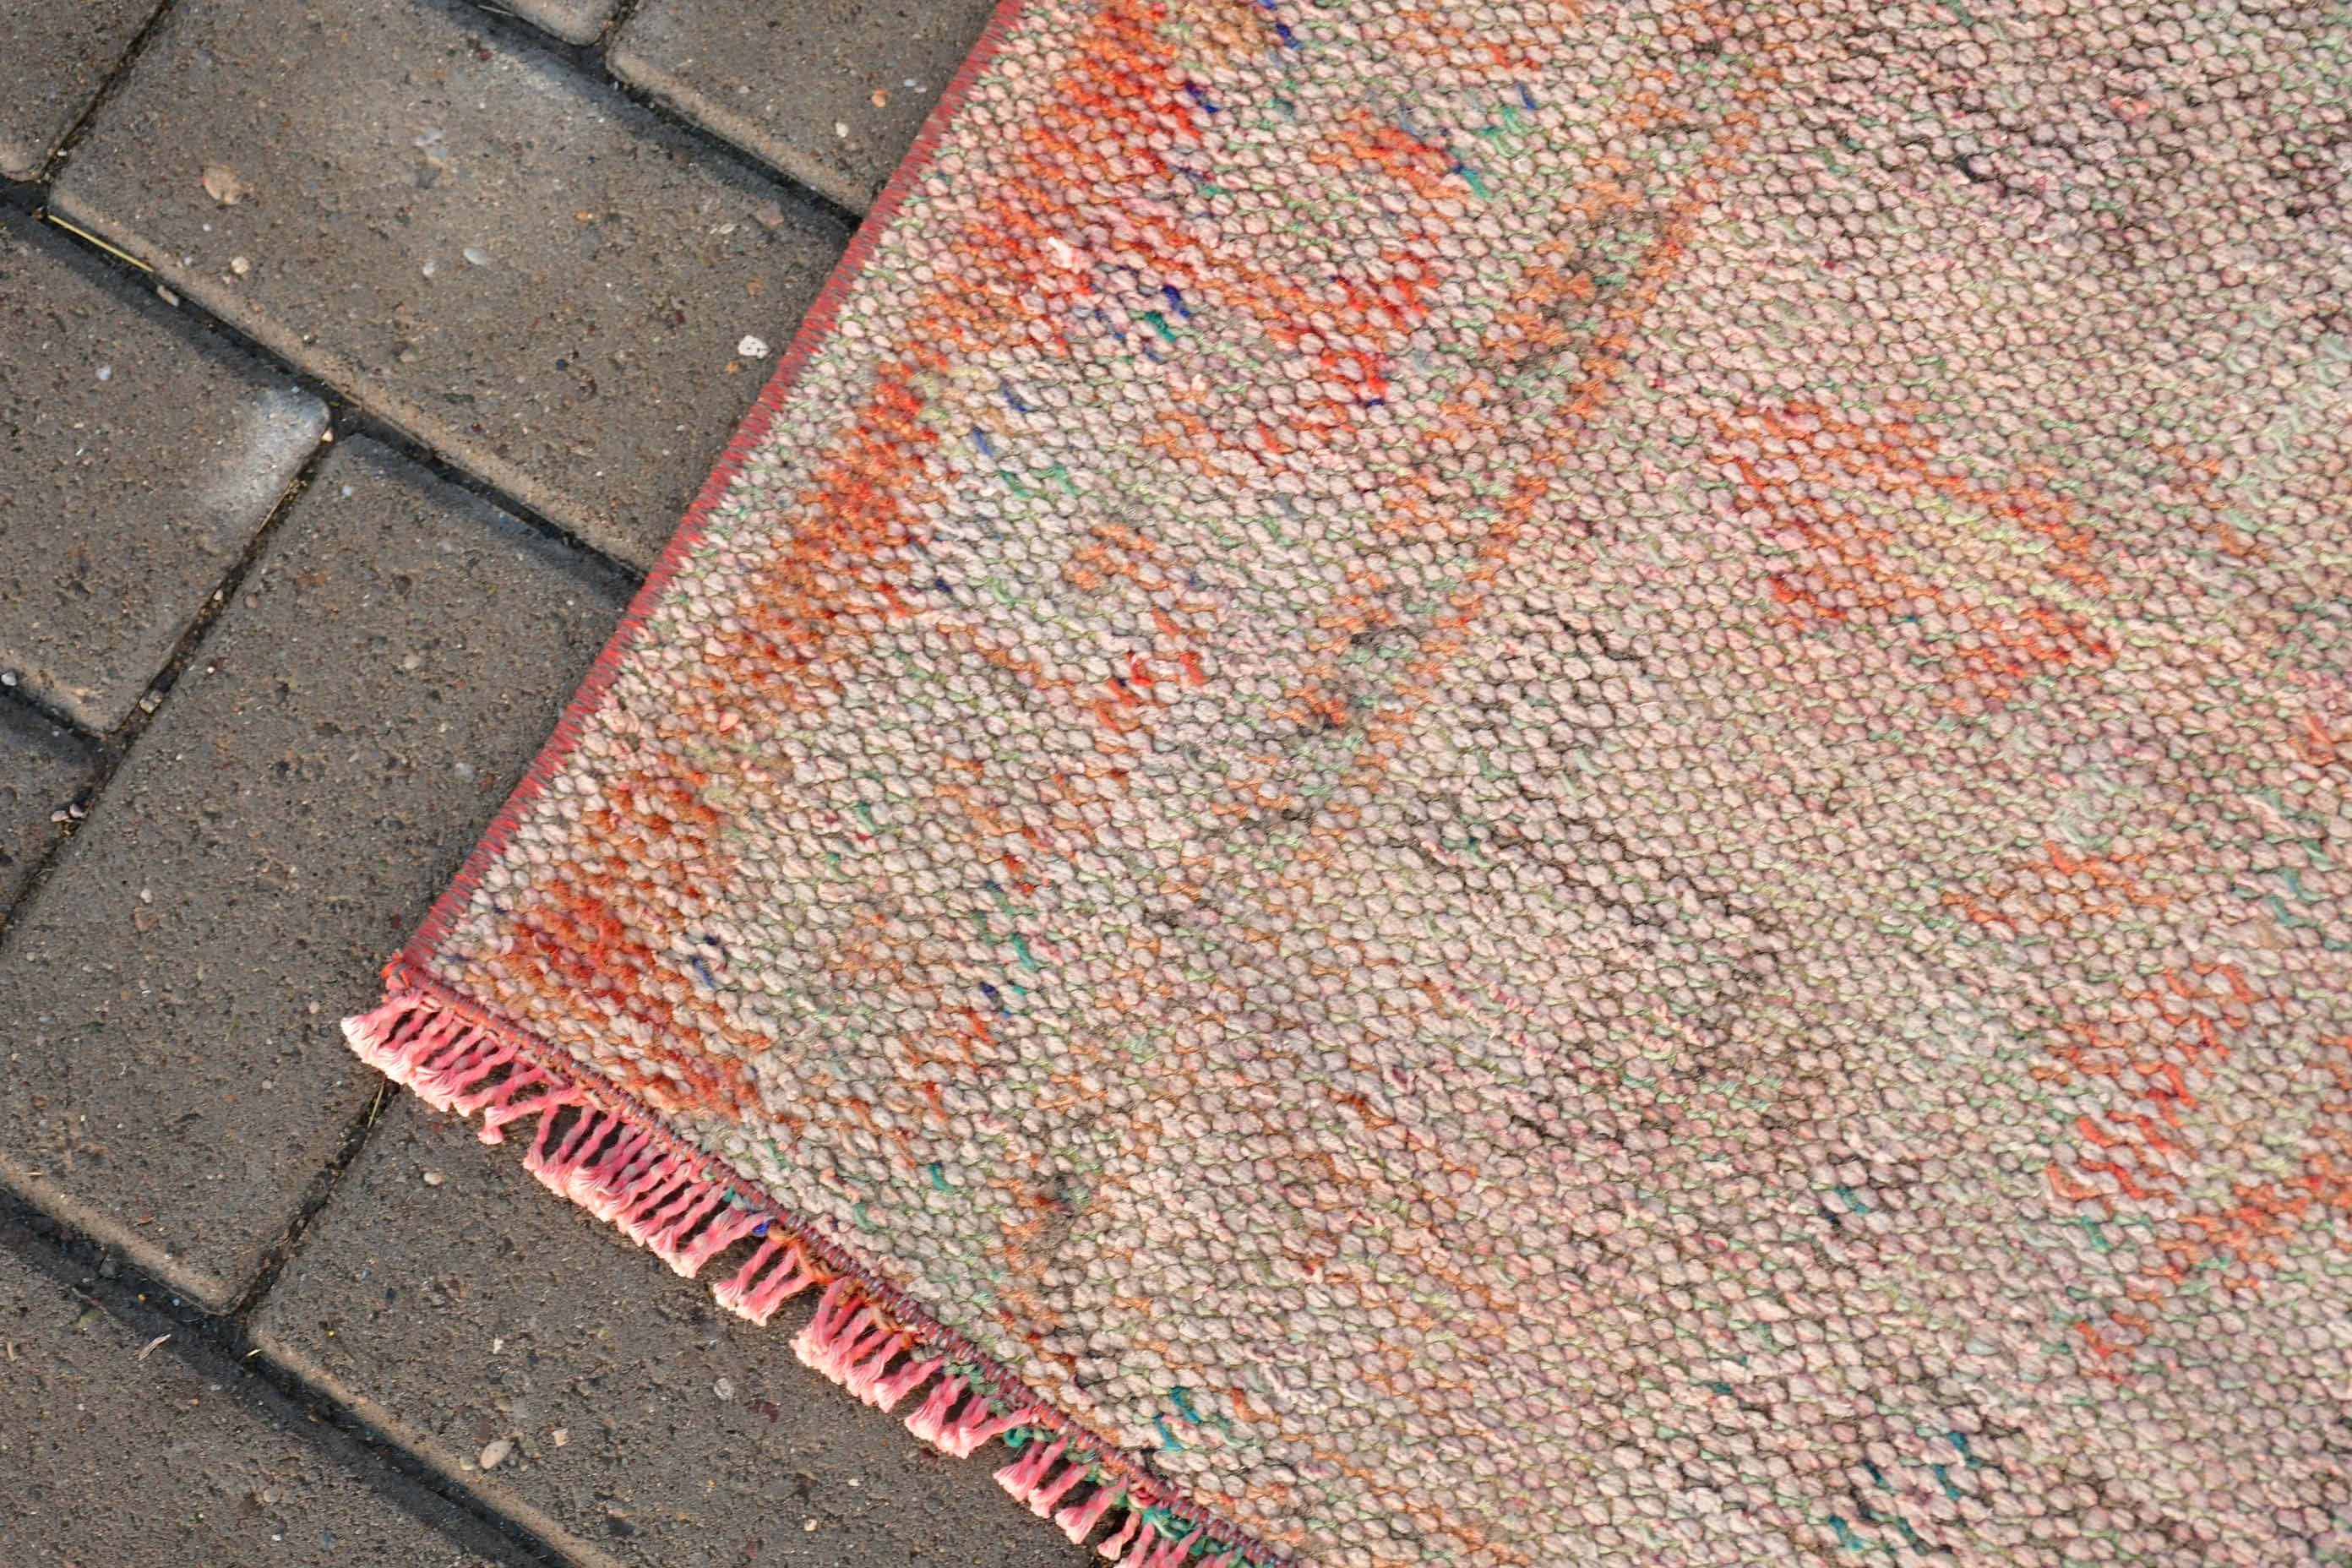 Wool Rug, Entry Rug, Turkish Rug, Rugs for Wall Hanging, Red Home Decor Rug, Vintage Rug, 2.4x4.6 ft Small Rugs, Antique Rug, Bath Rug